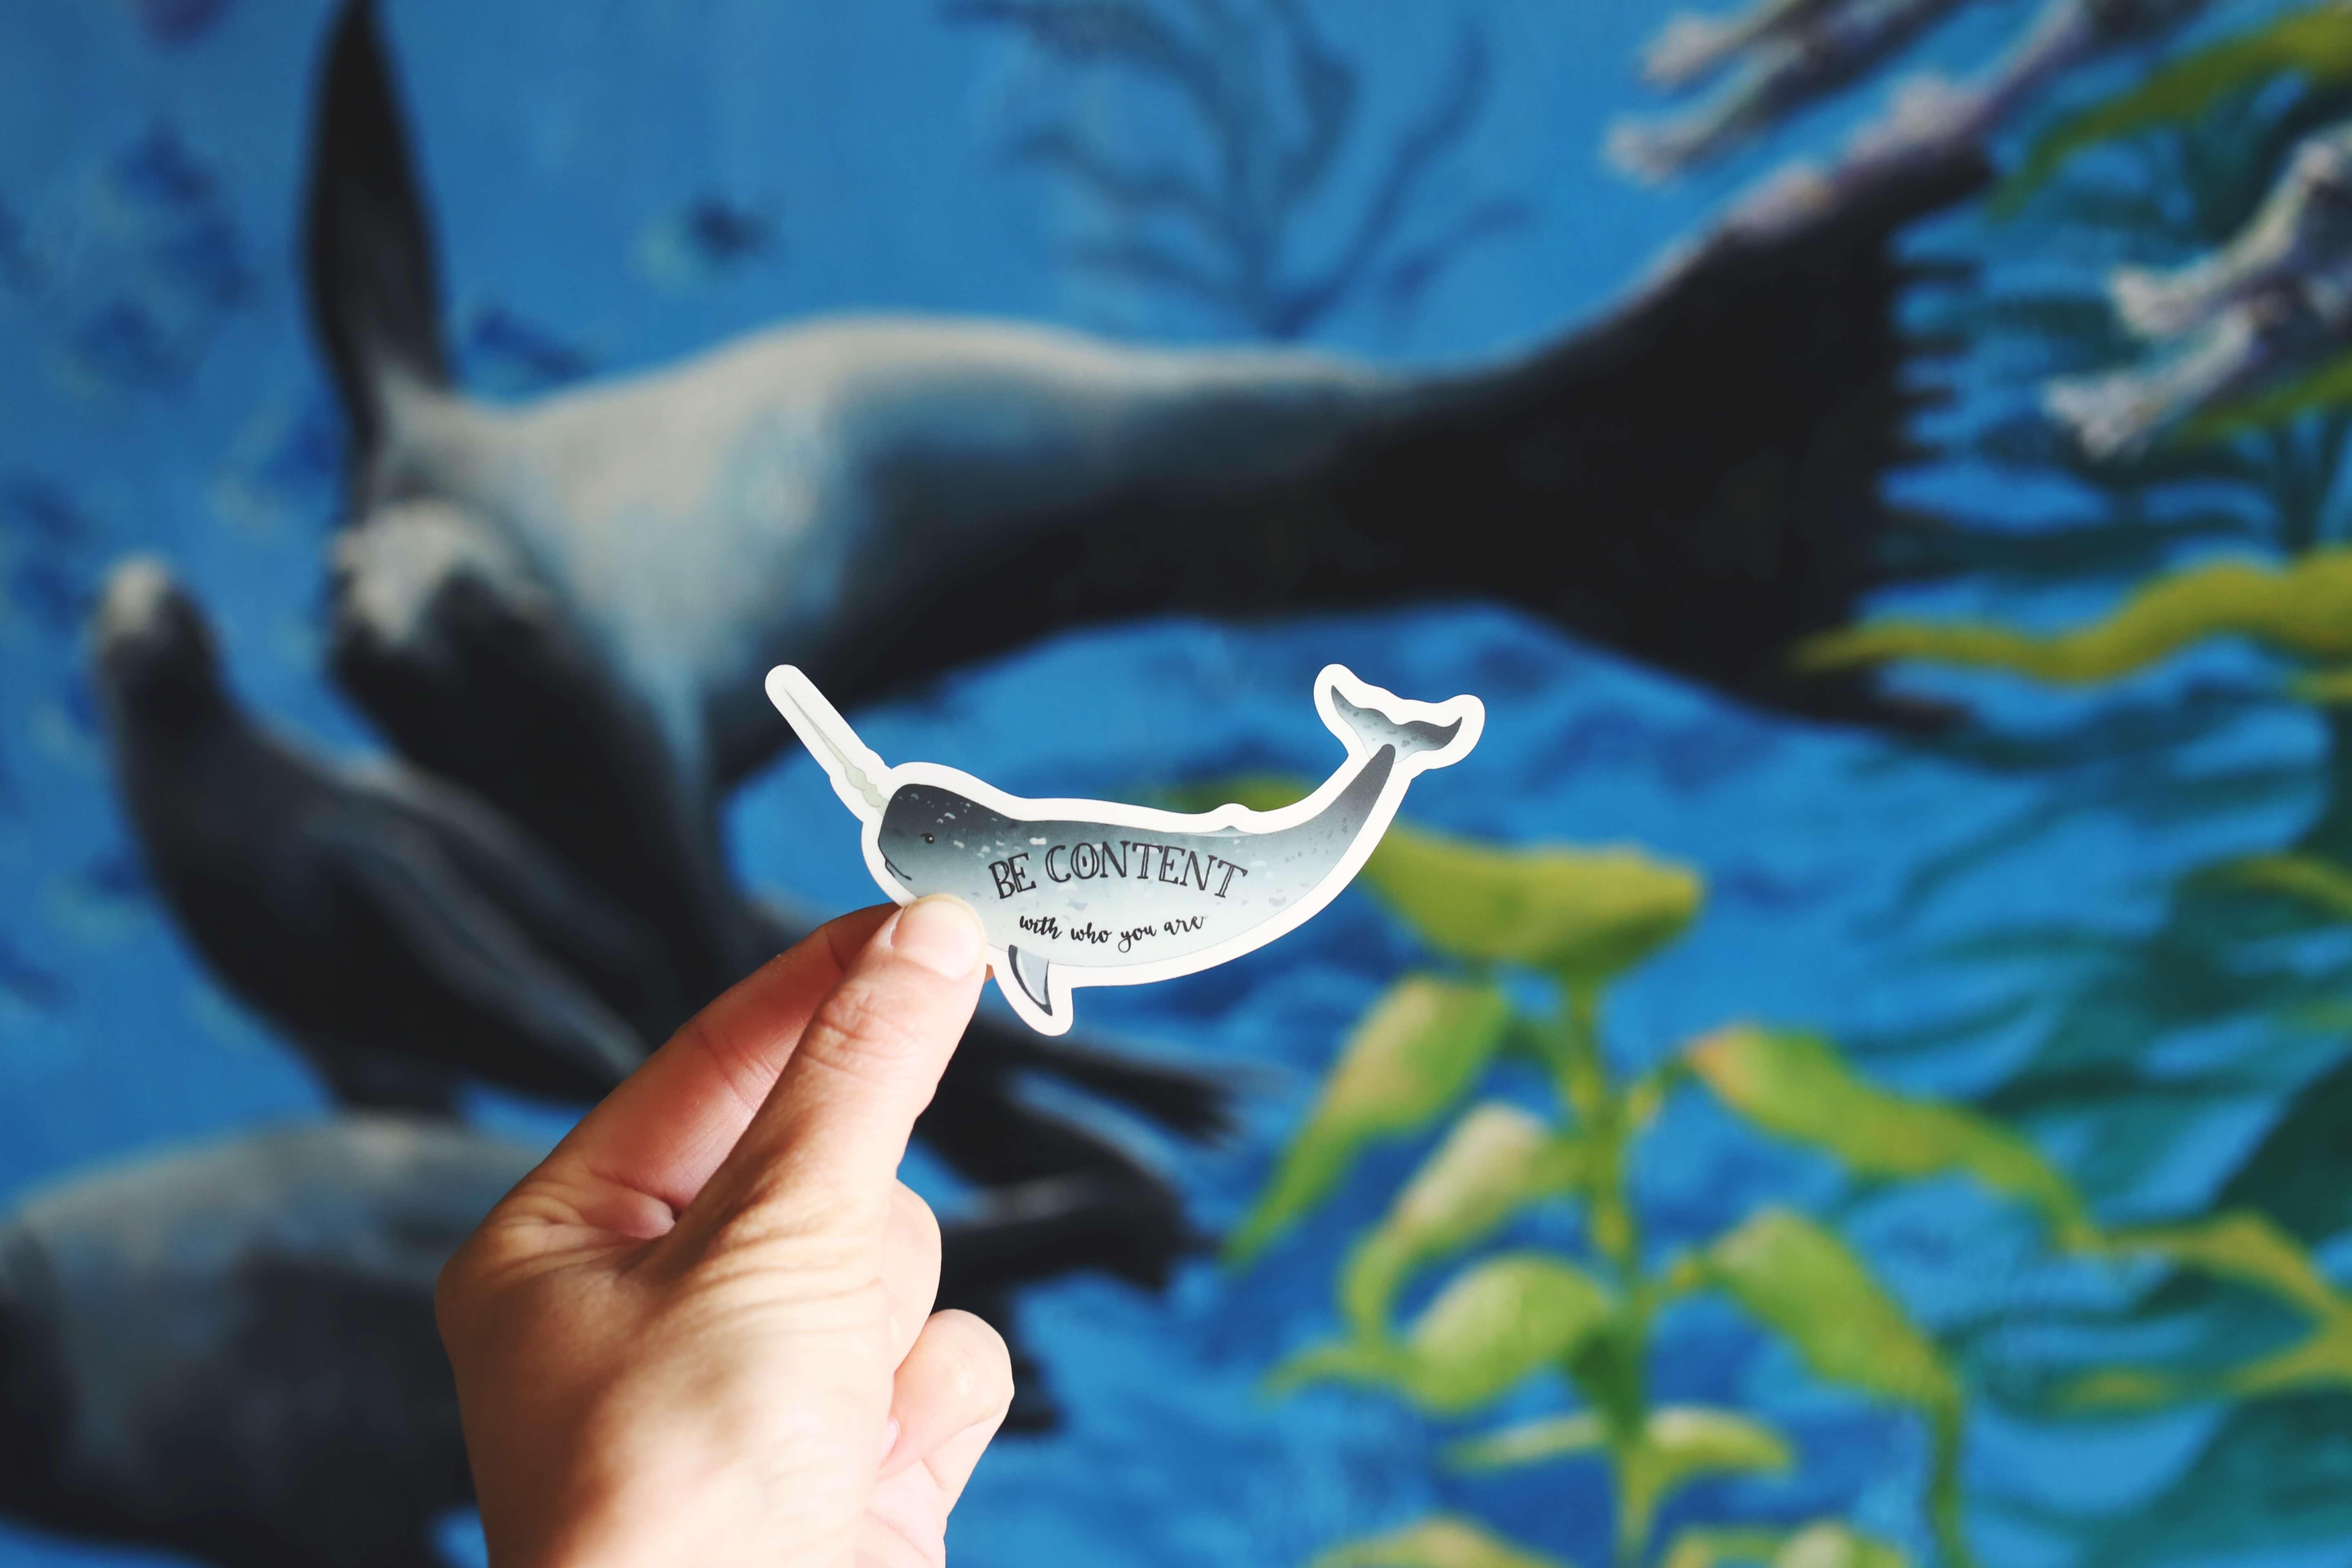 A hand holding a sticker resembling a fish with Be Content written on it and real fishes in the background